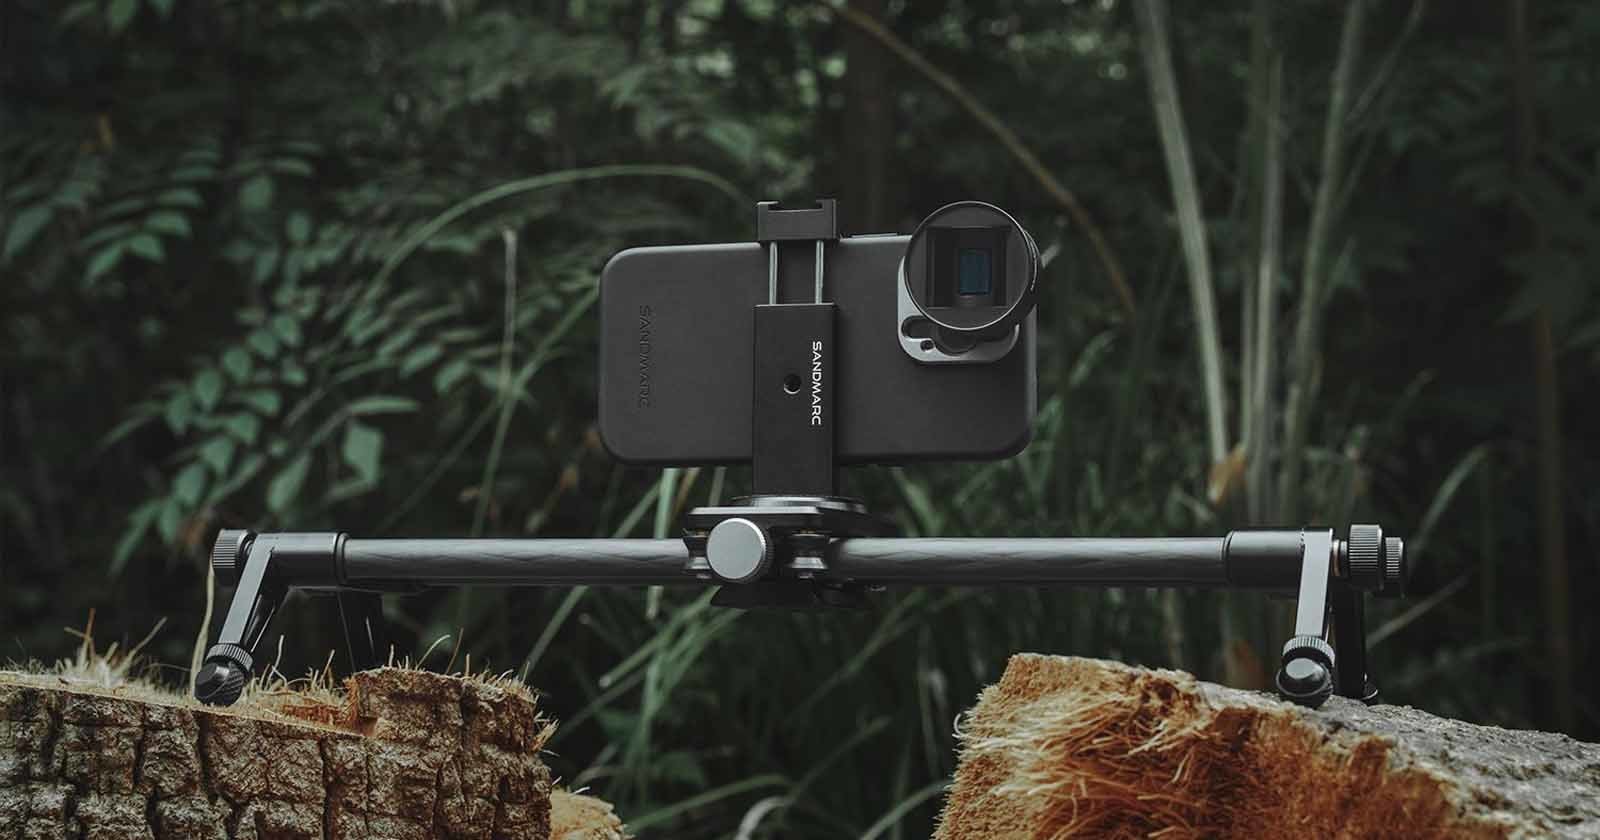 Sandmarc’s New Mini Slider is Made for the iPhone and Action Cameras